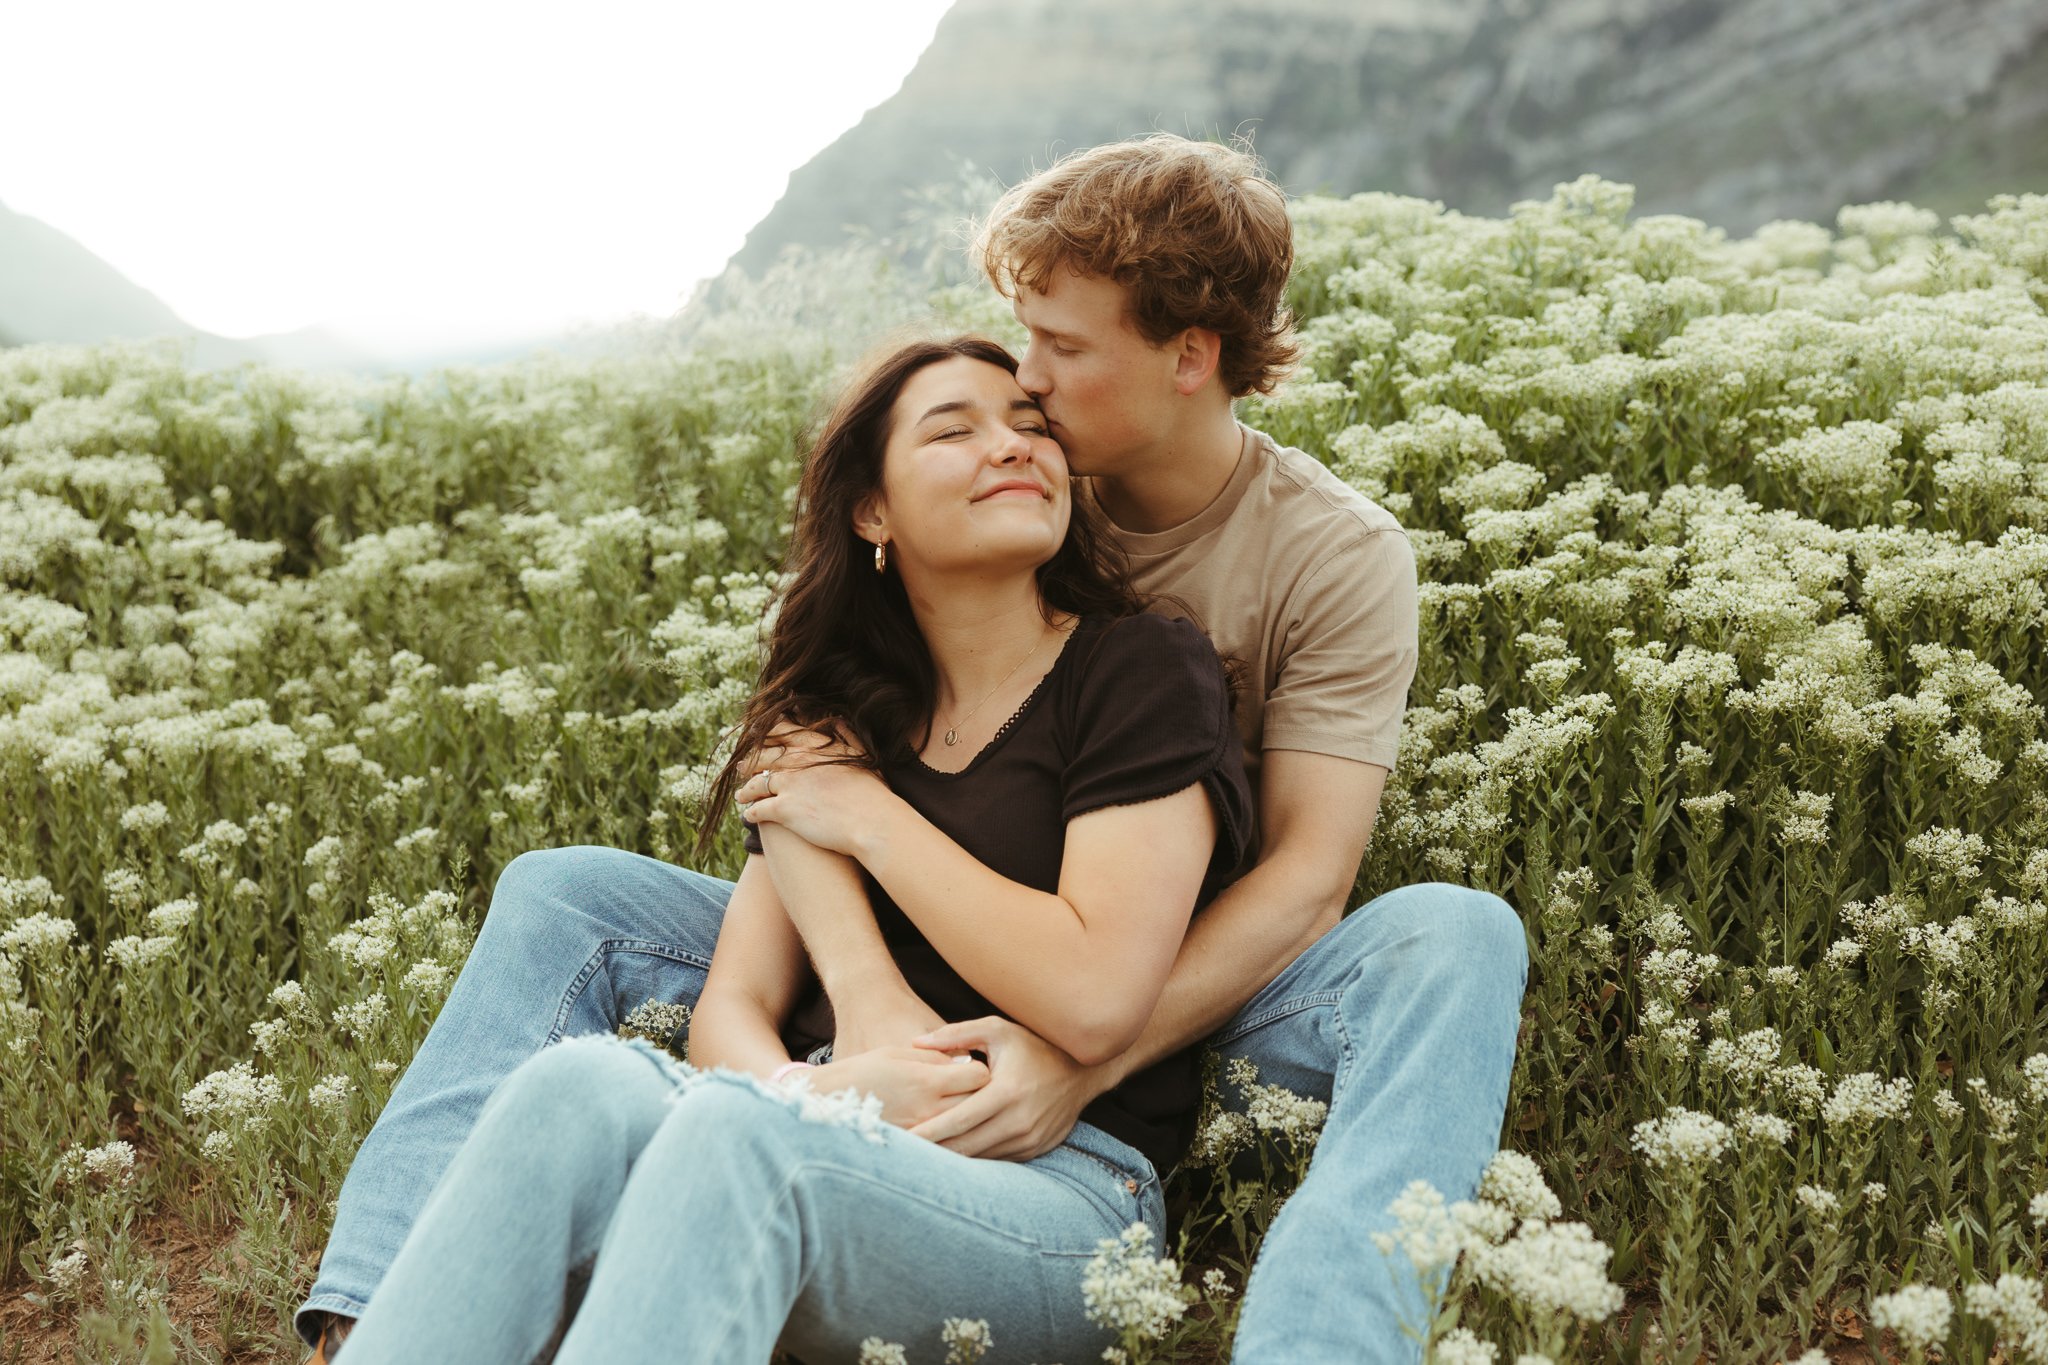 Spring-Provo-Canyon-Wildflowers-Engagement-Session-14